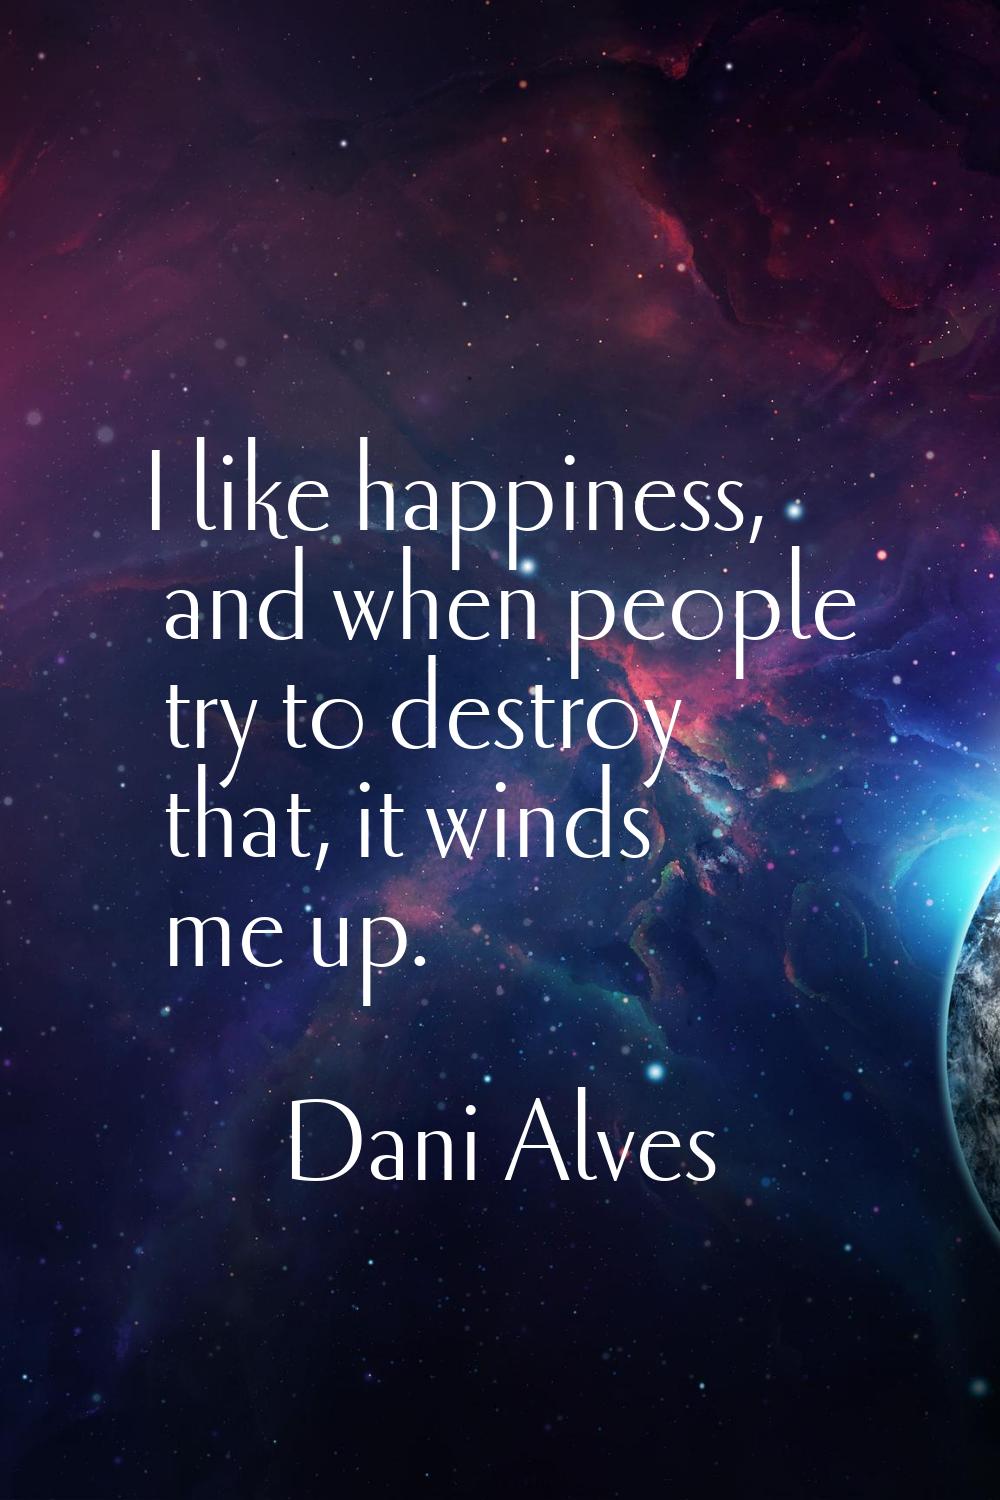 I like happiness, and when people try to destroy that, it winds me up.